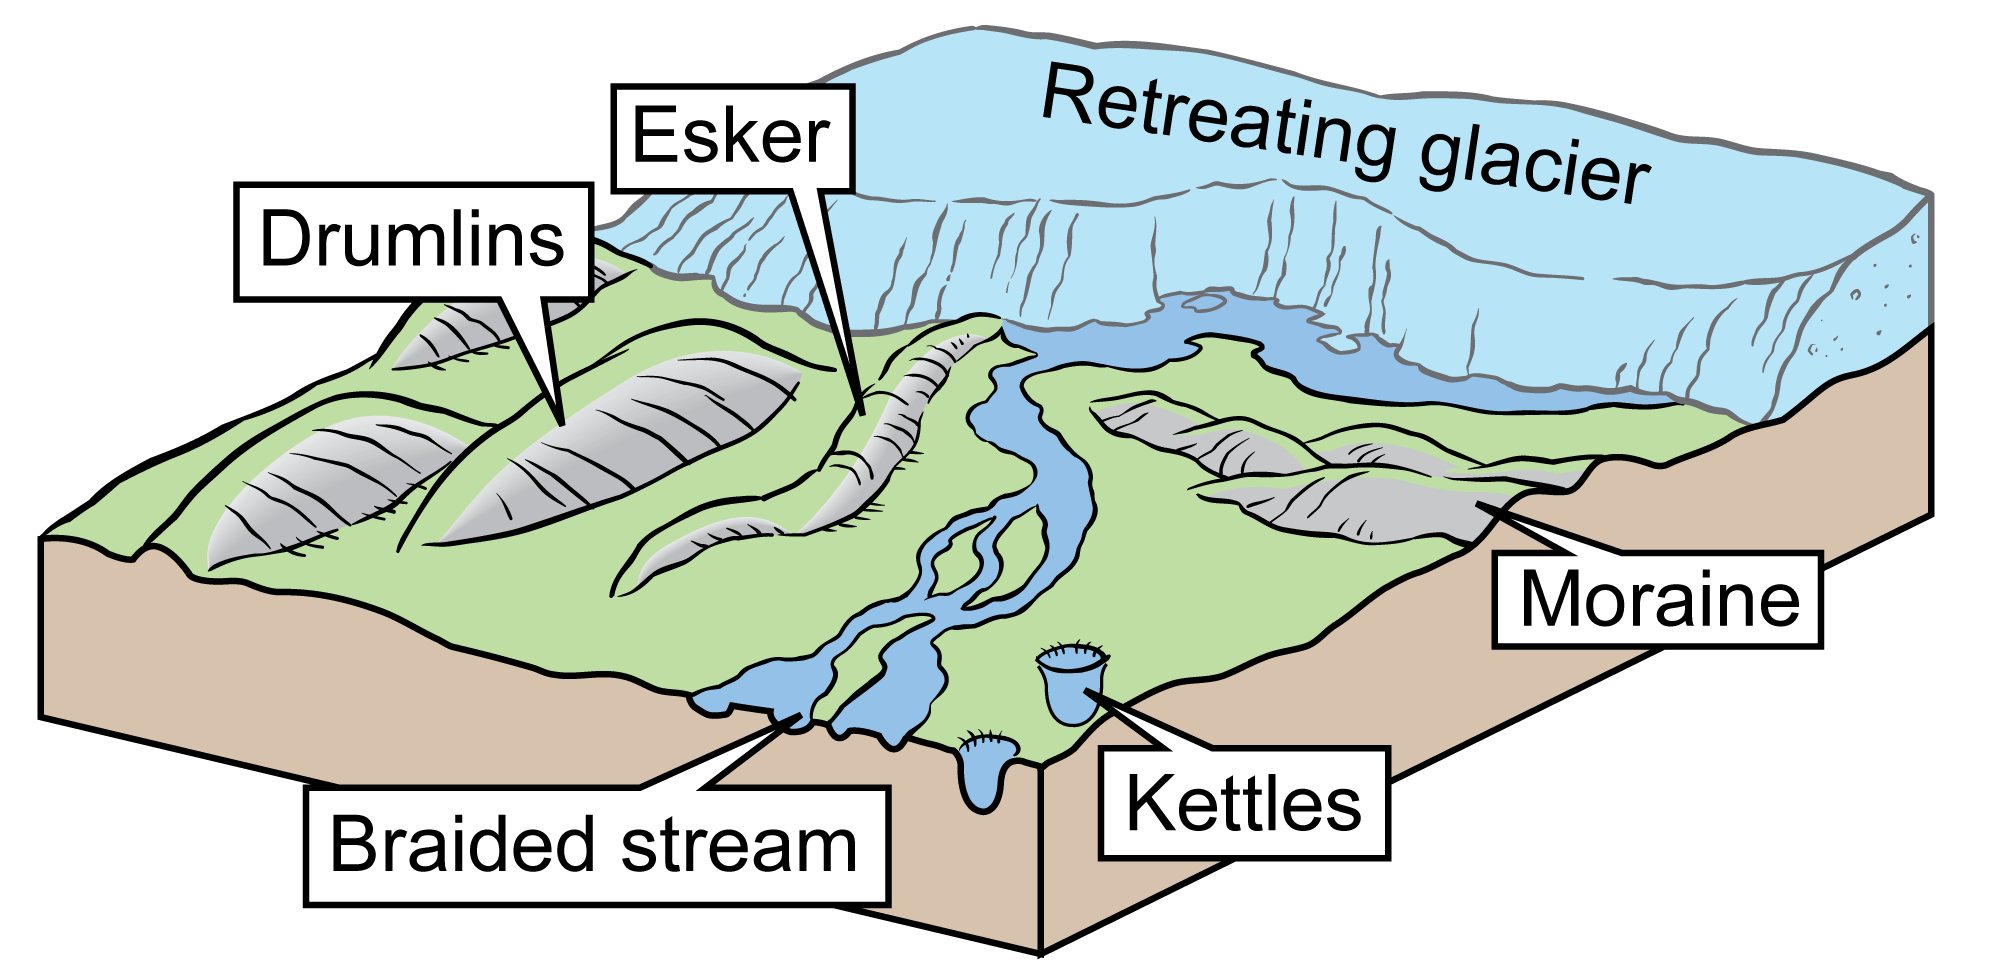 Cartoon diagram showing different types of glacial landforms in front of a retreating glacier. A braided stream is formed by the meltwater flowing from the front of the glacier. Moraine, ridges formed at the end of the glacier, are labeled to the right of the stream. Kettles, small lakes, dot the landscape. Drumlins, which are oblong hills, and eskers, which are snake-like hills, are also labeled.